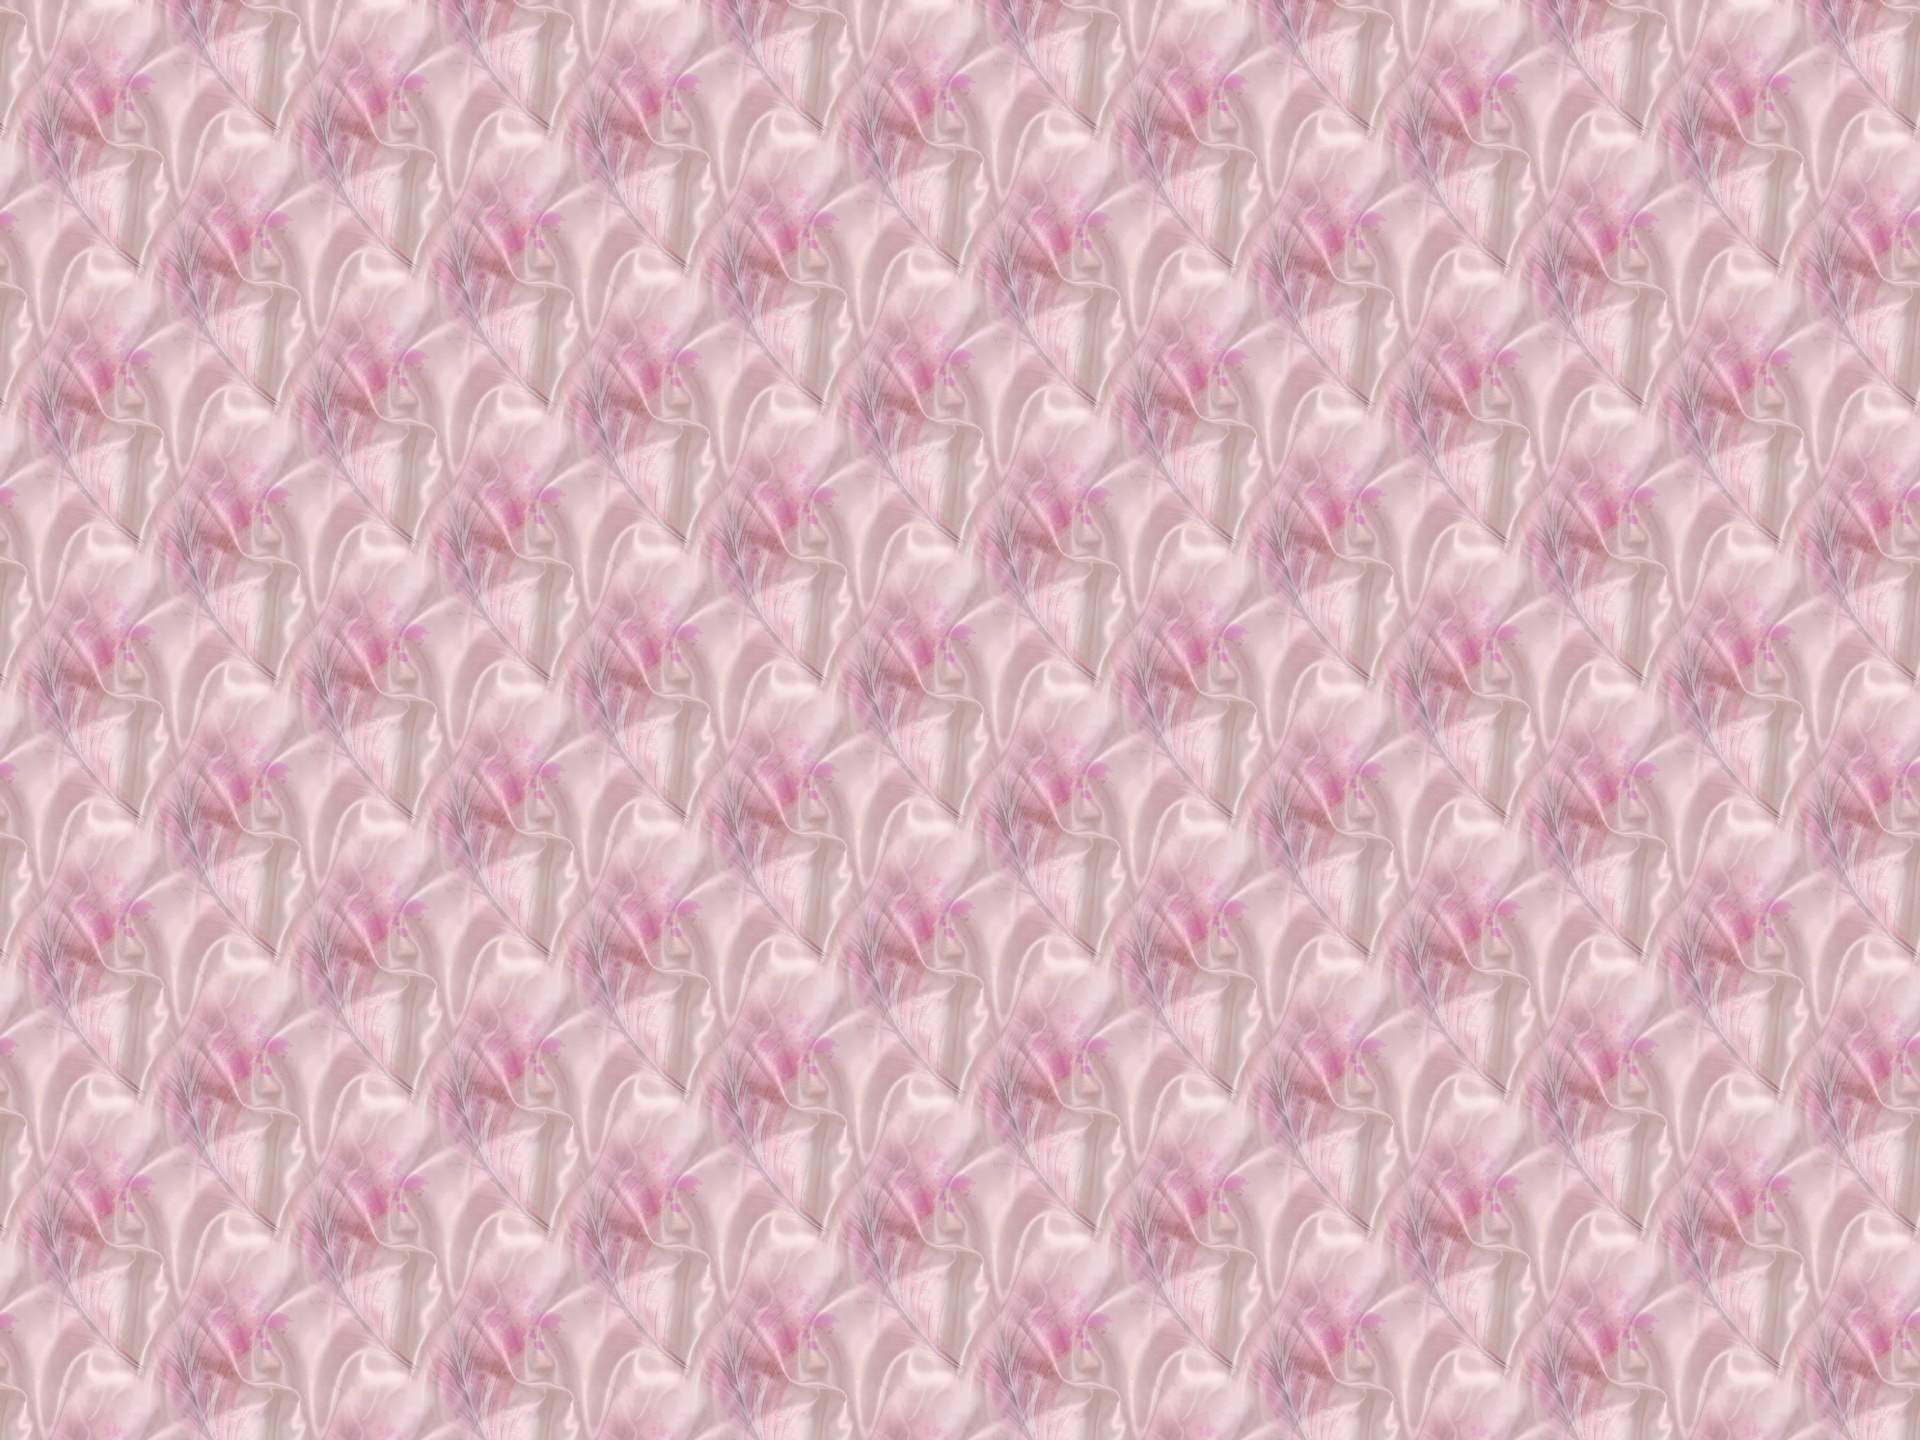 Satin background with feathers to use in scrapbook and craft projects